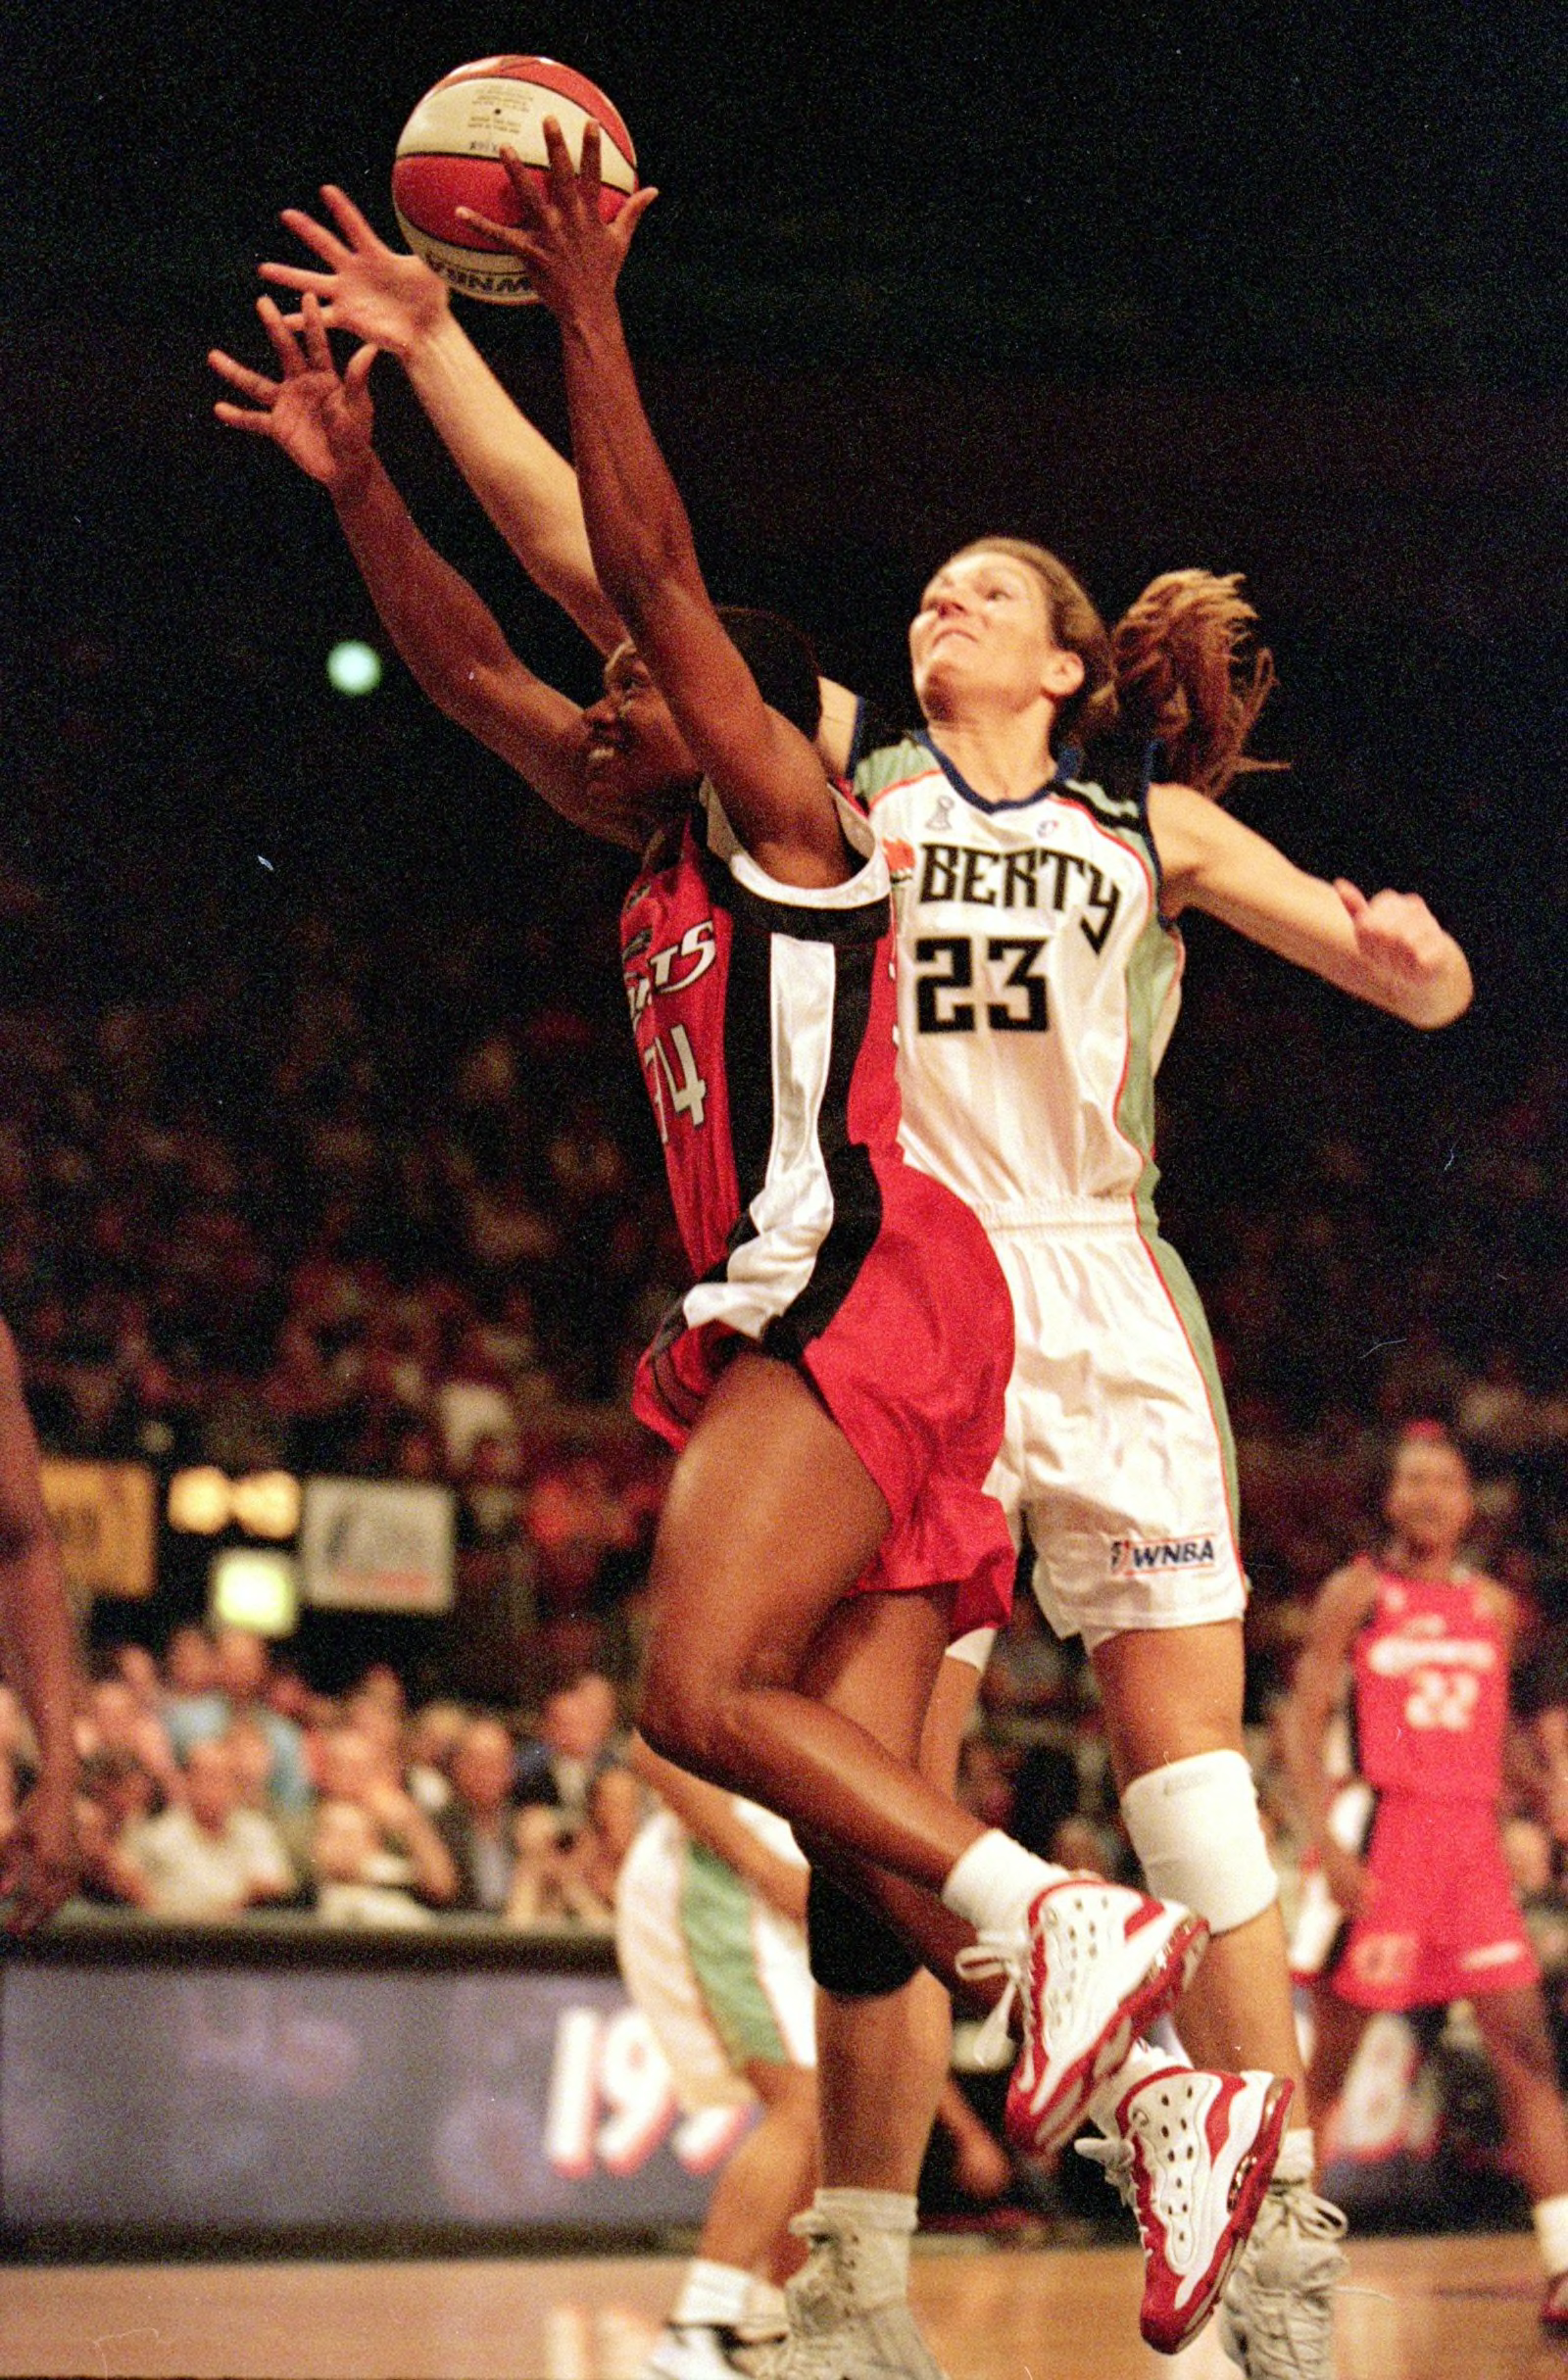 KRT SPORTS STORY SLUGGED: WNBA KRT PHOTOGRAPH BY JENNIFER HACK/KRT (July  15) WASHINGTON, DC -- Teresa Weatherspoon (11) of the New York Liberty  competes in the 2002 WNBA All-Star Game played at